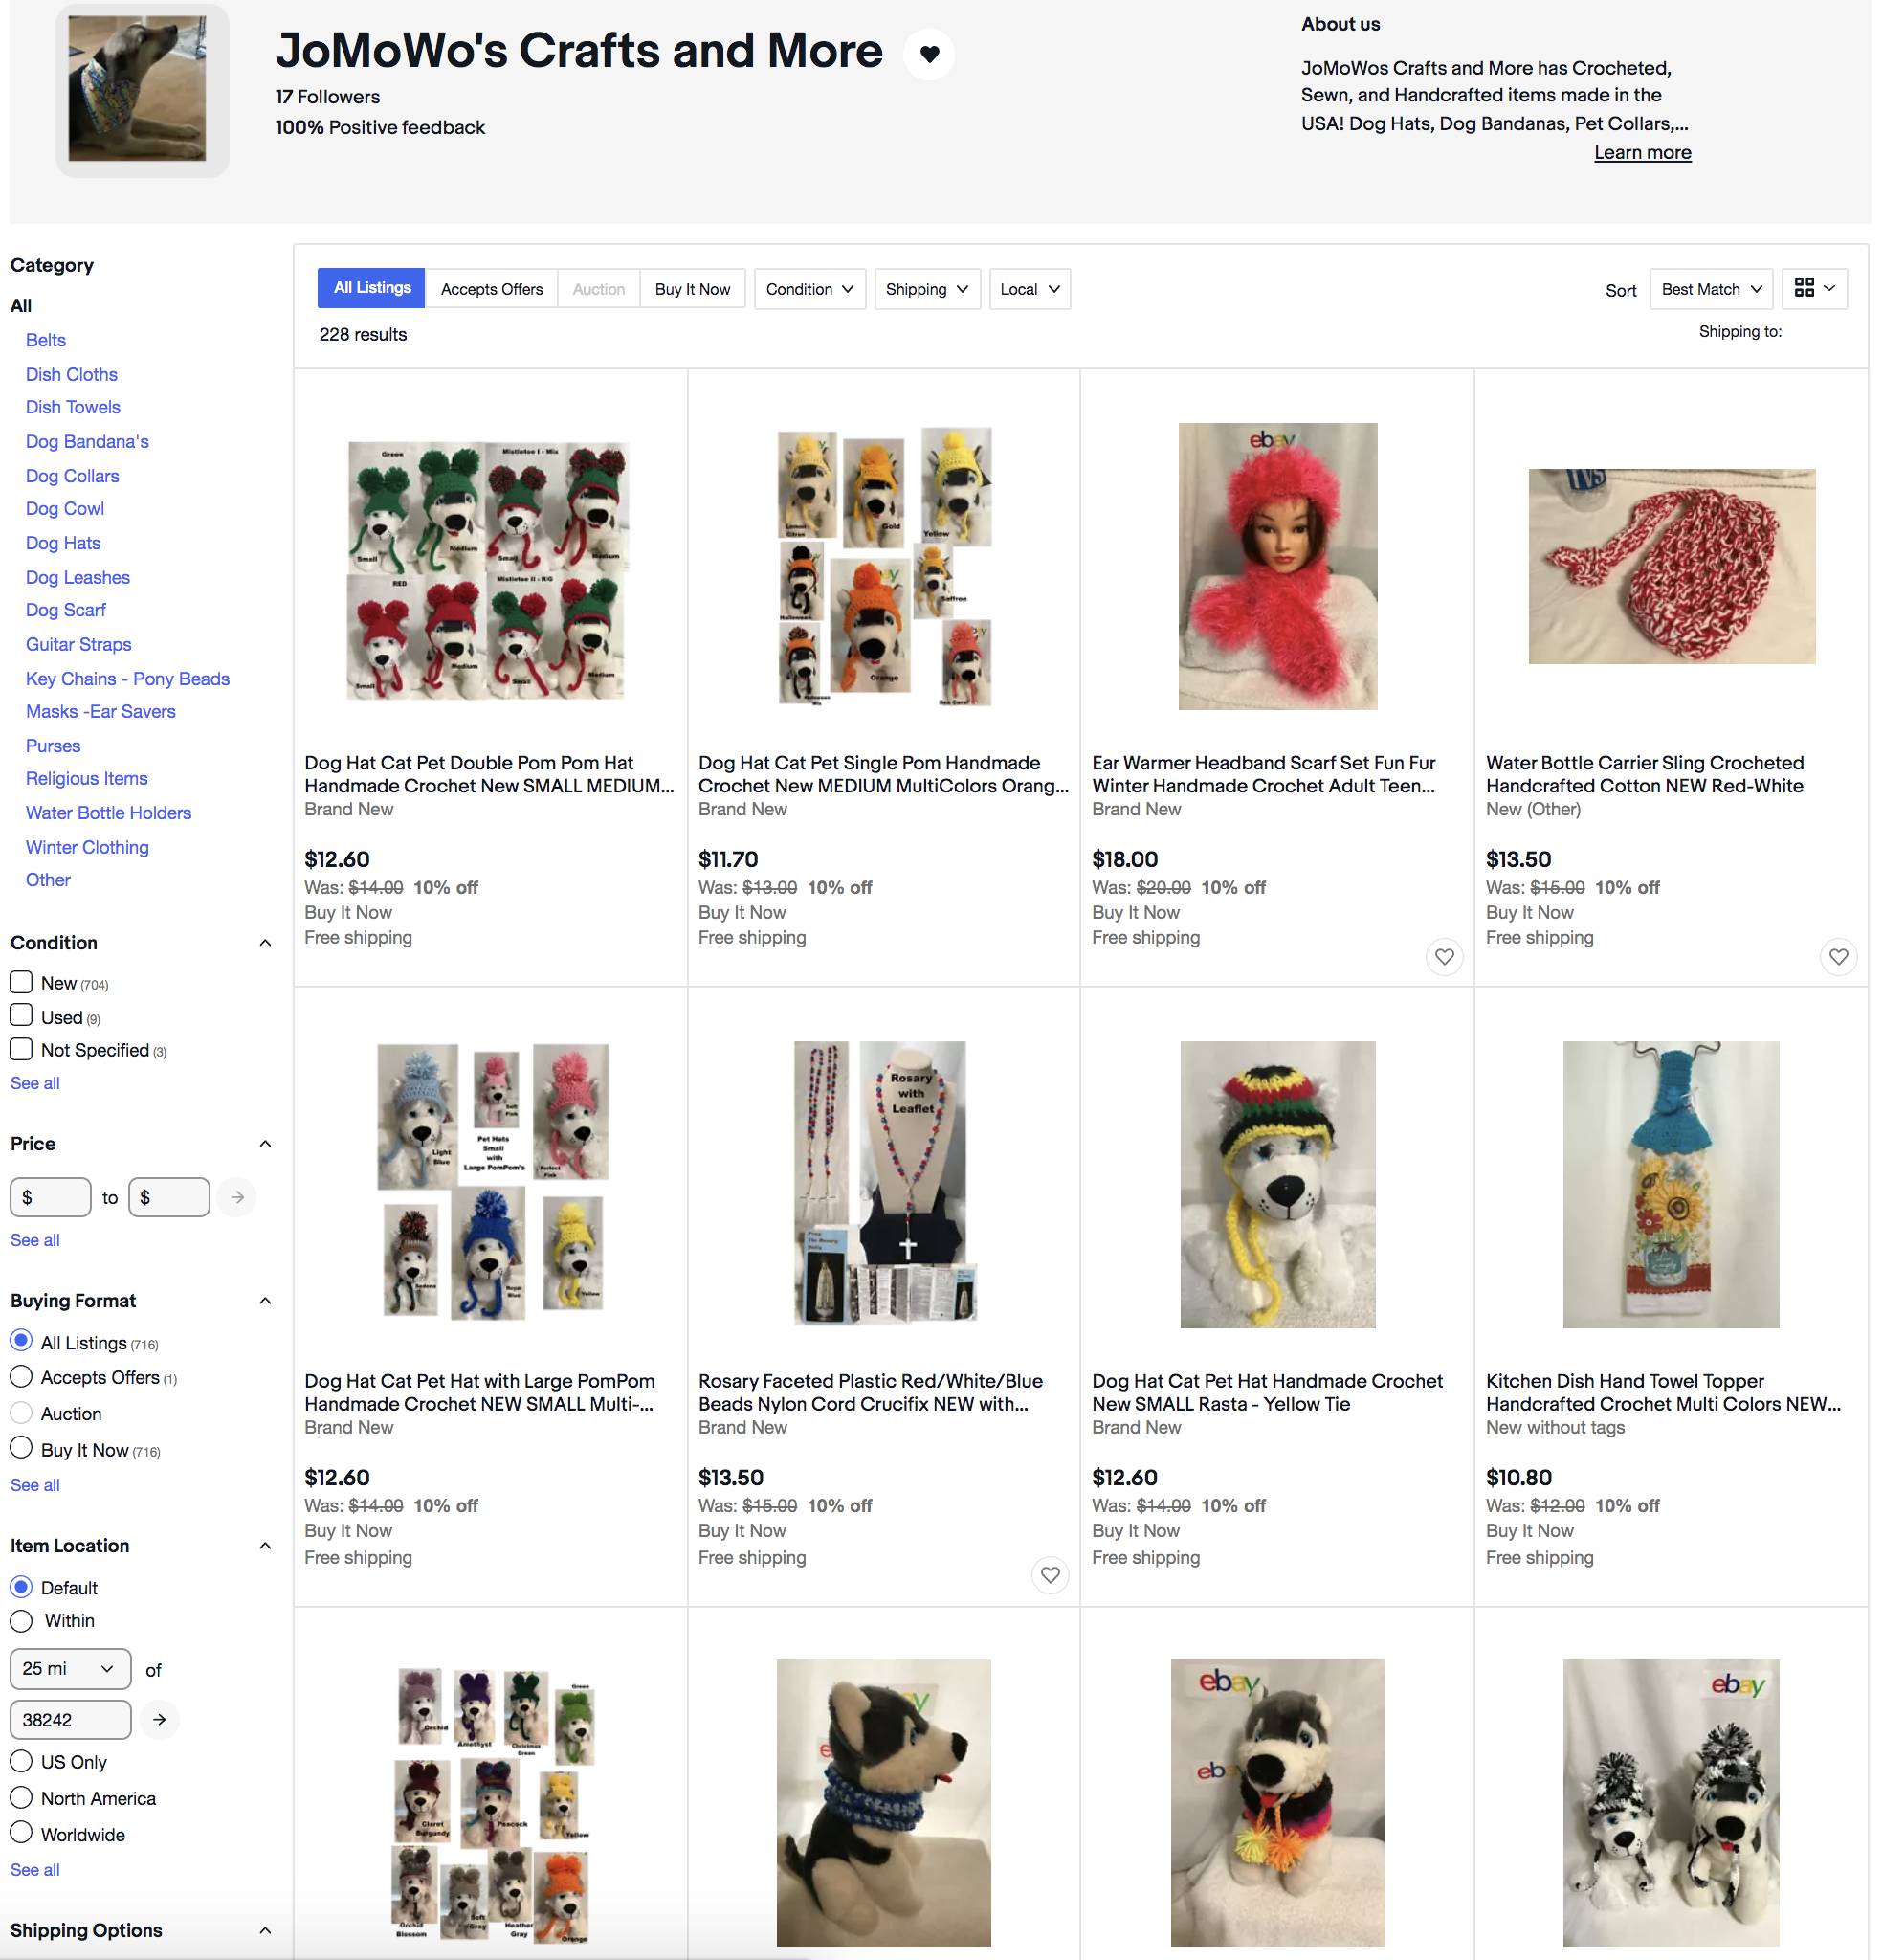 JoMoWos Crafts and More Ebay Store Best Match November 26th 2021